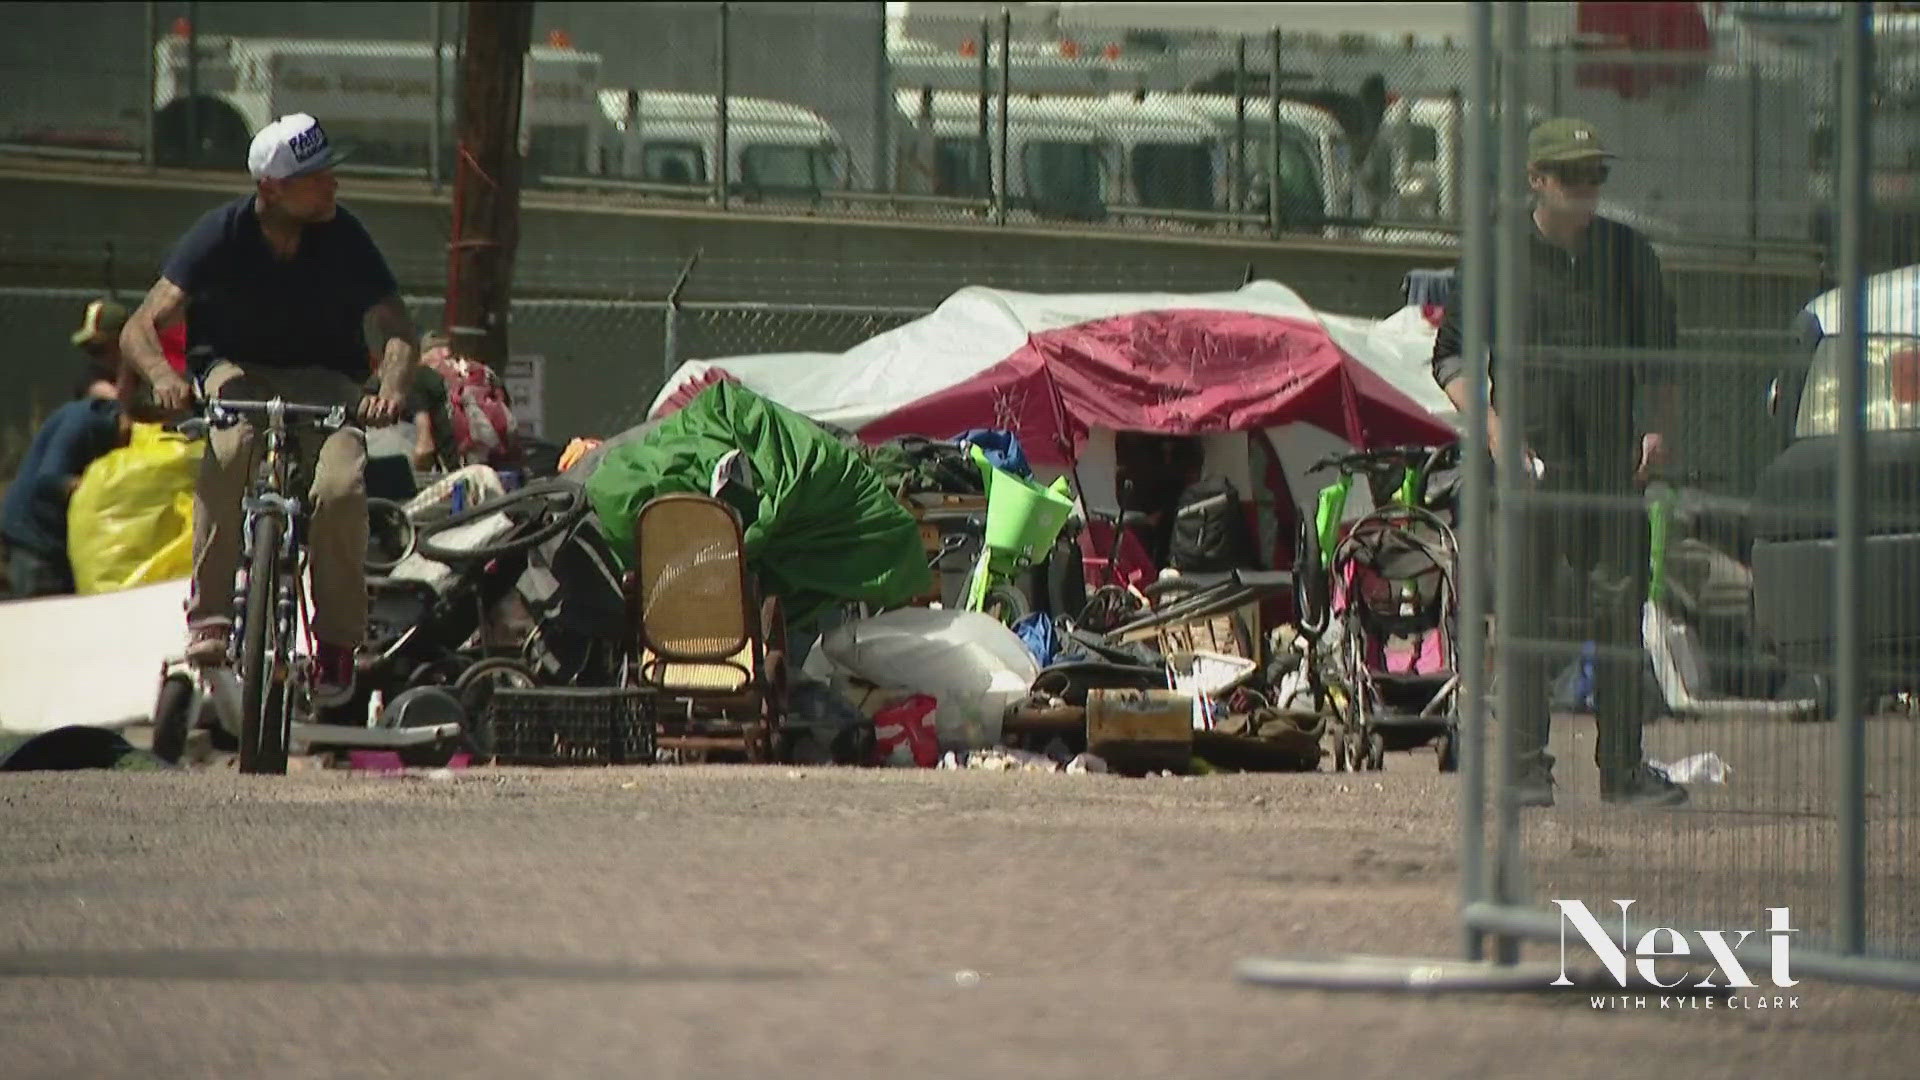 Some people at the 4th Avenue and Lipan Street encampment received housing, while others were told to move along.